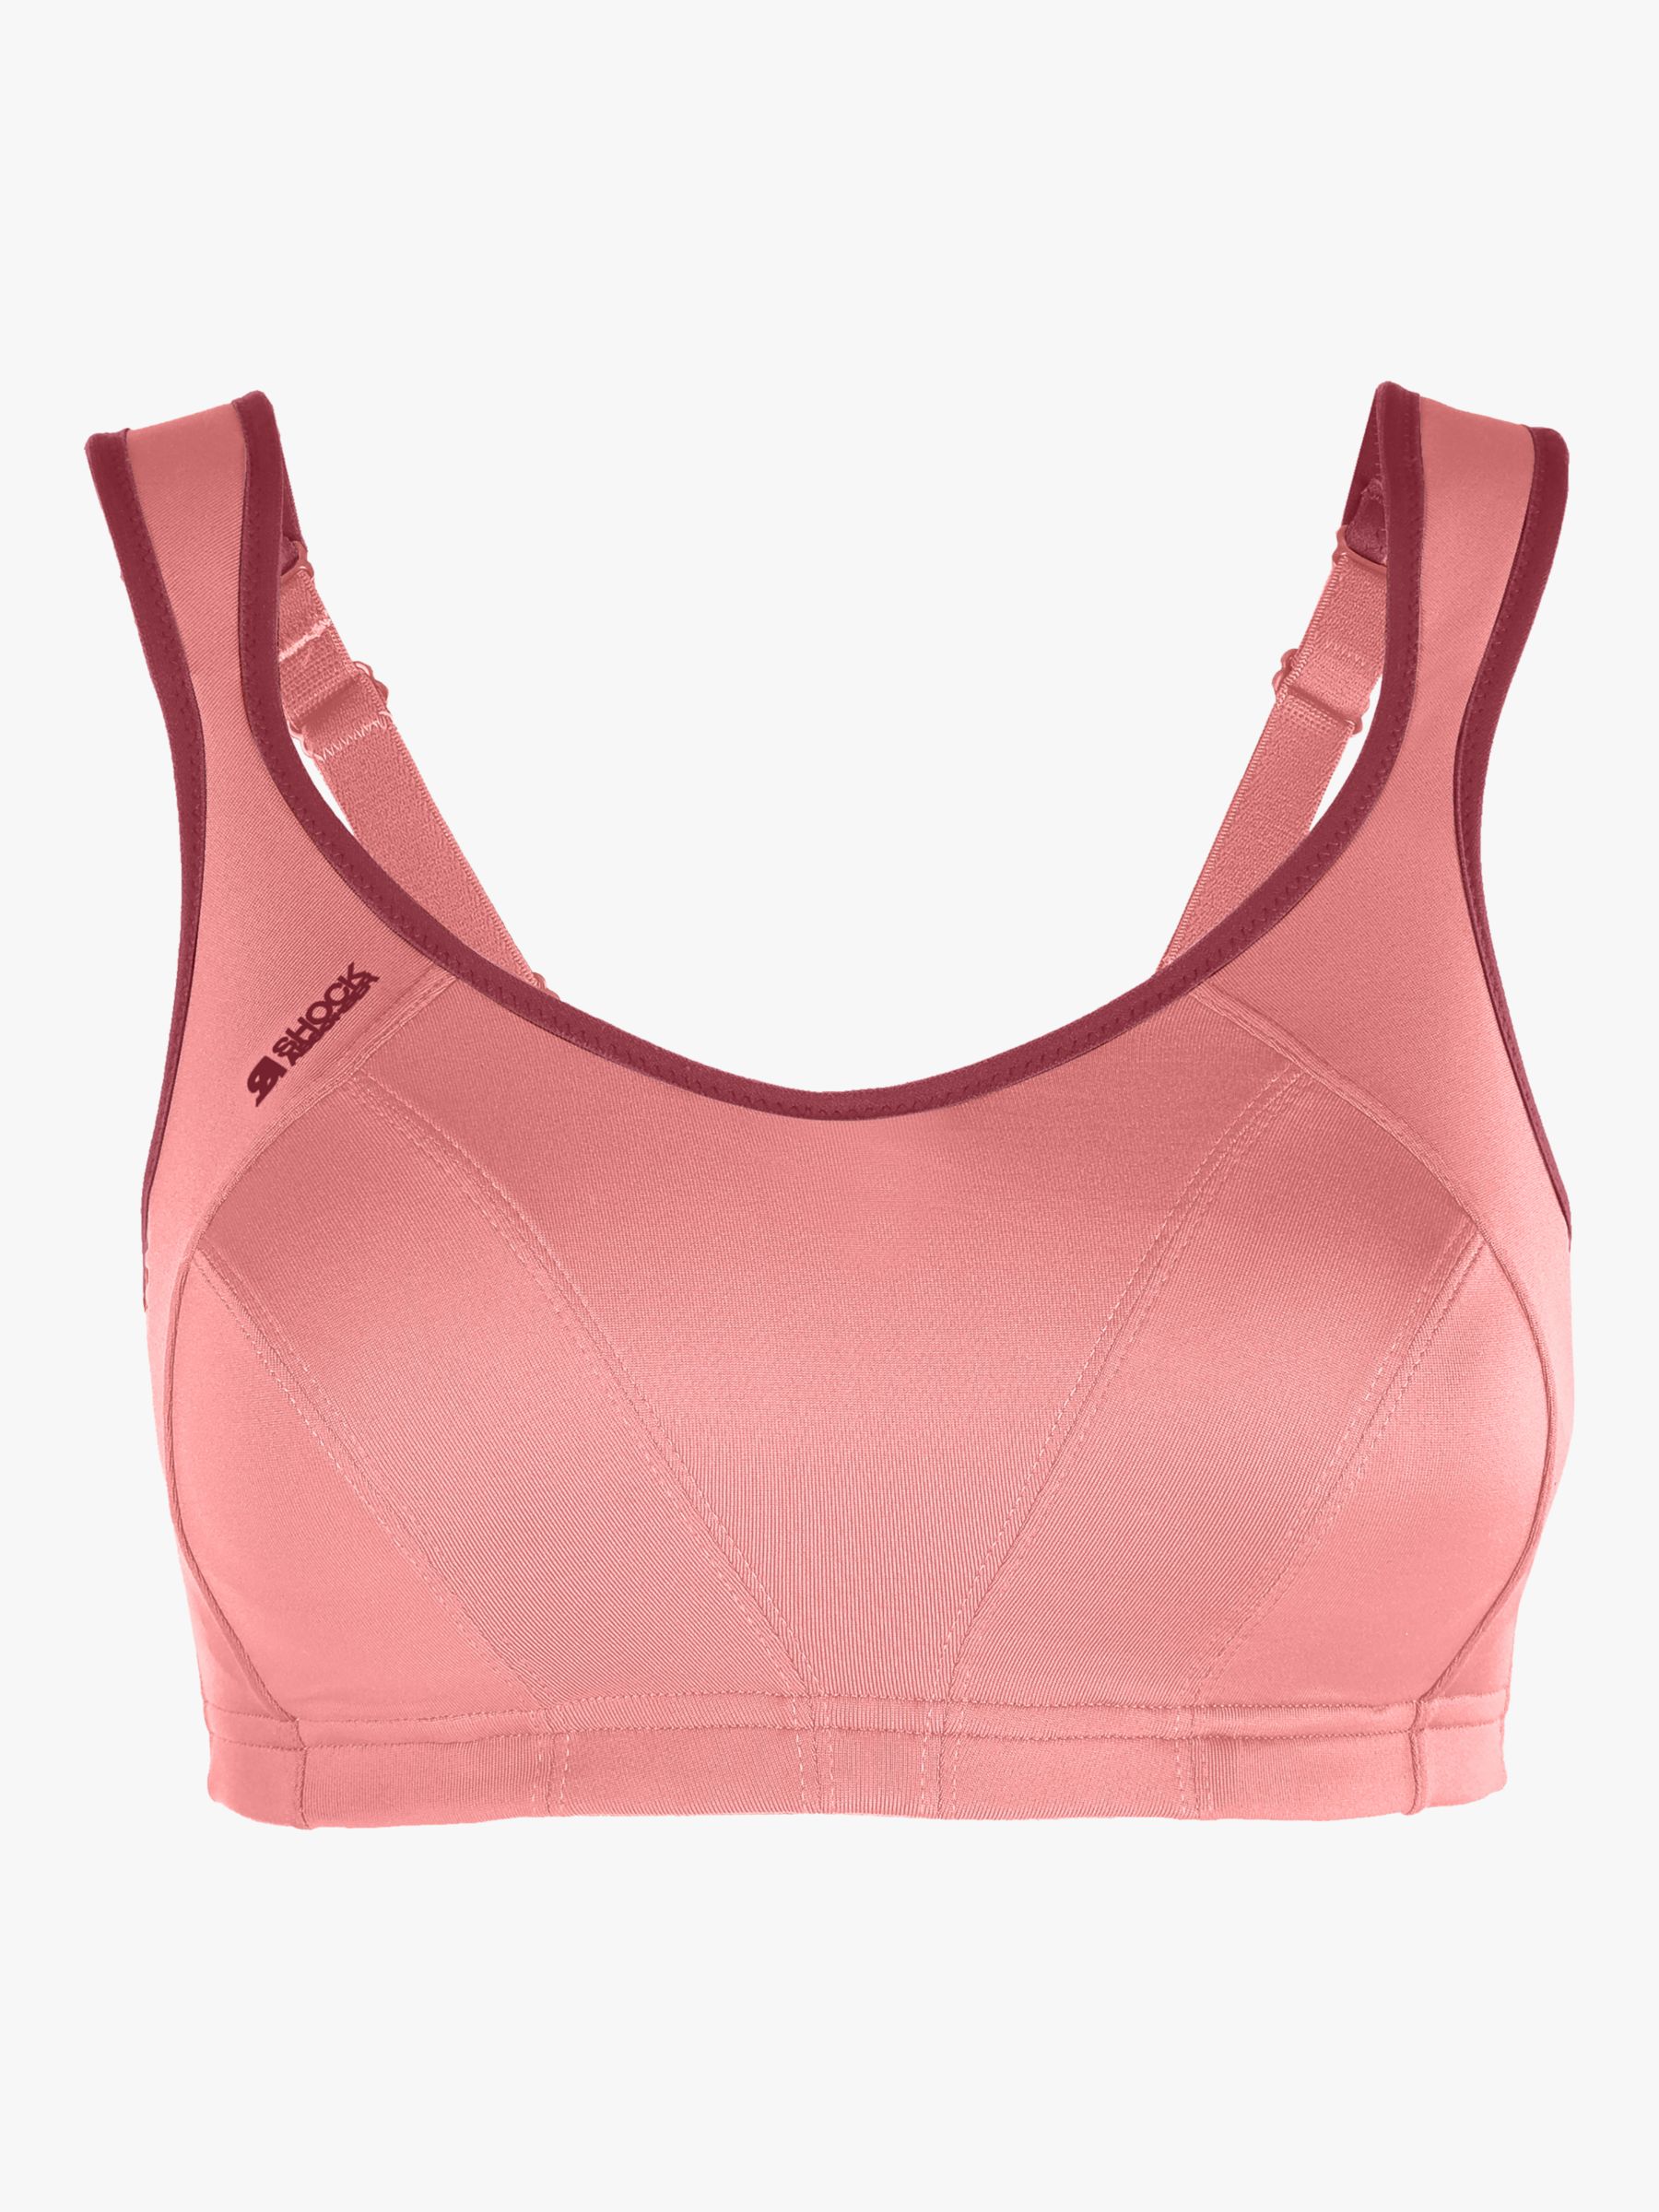 Shock Absorber Active Multi Sports Support Bra, Pink